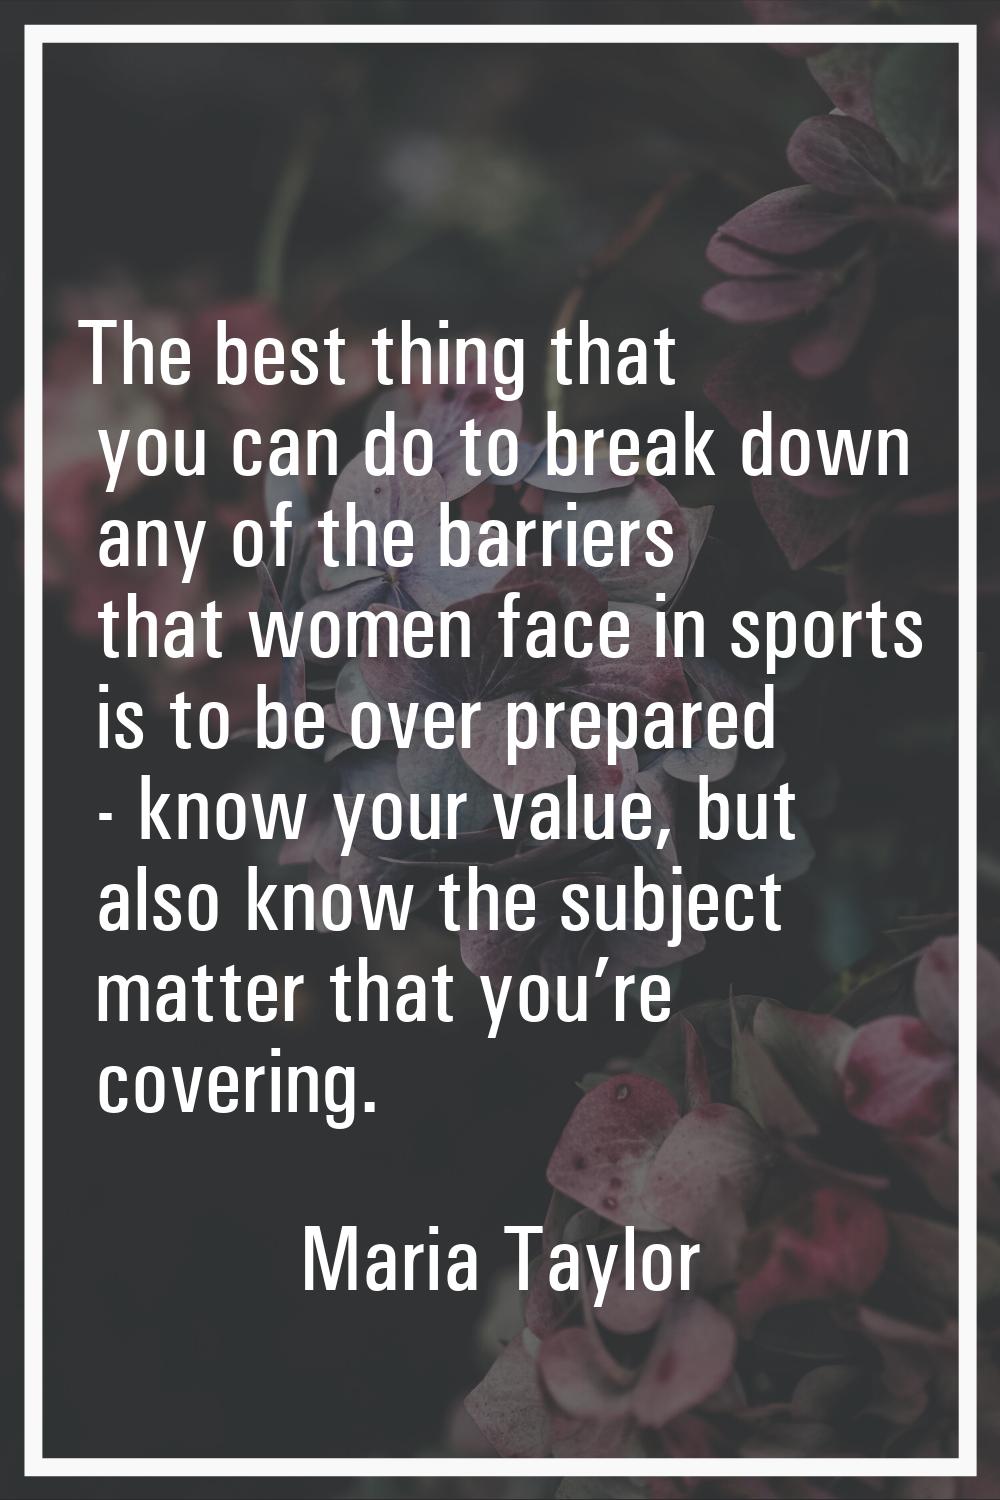 The best thing that you can do to break down any of the barriers that women face in sports is to be